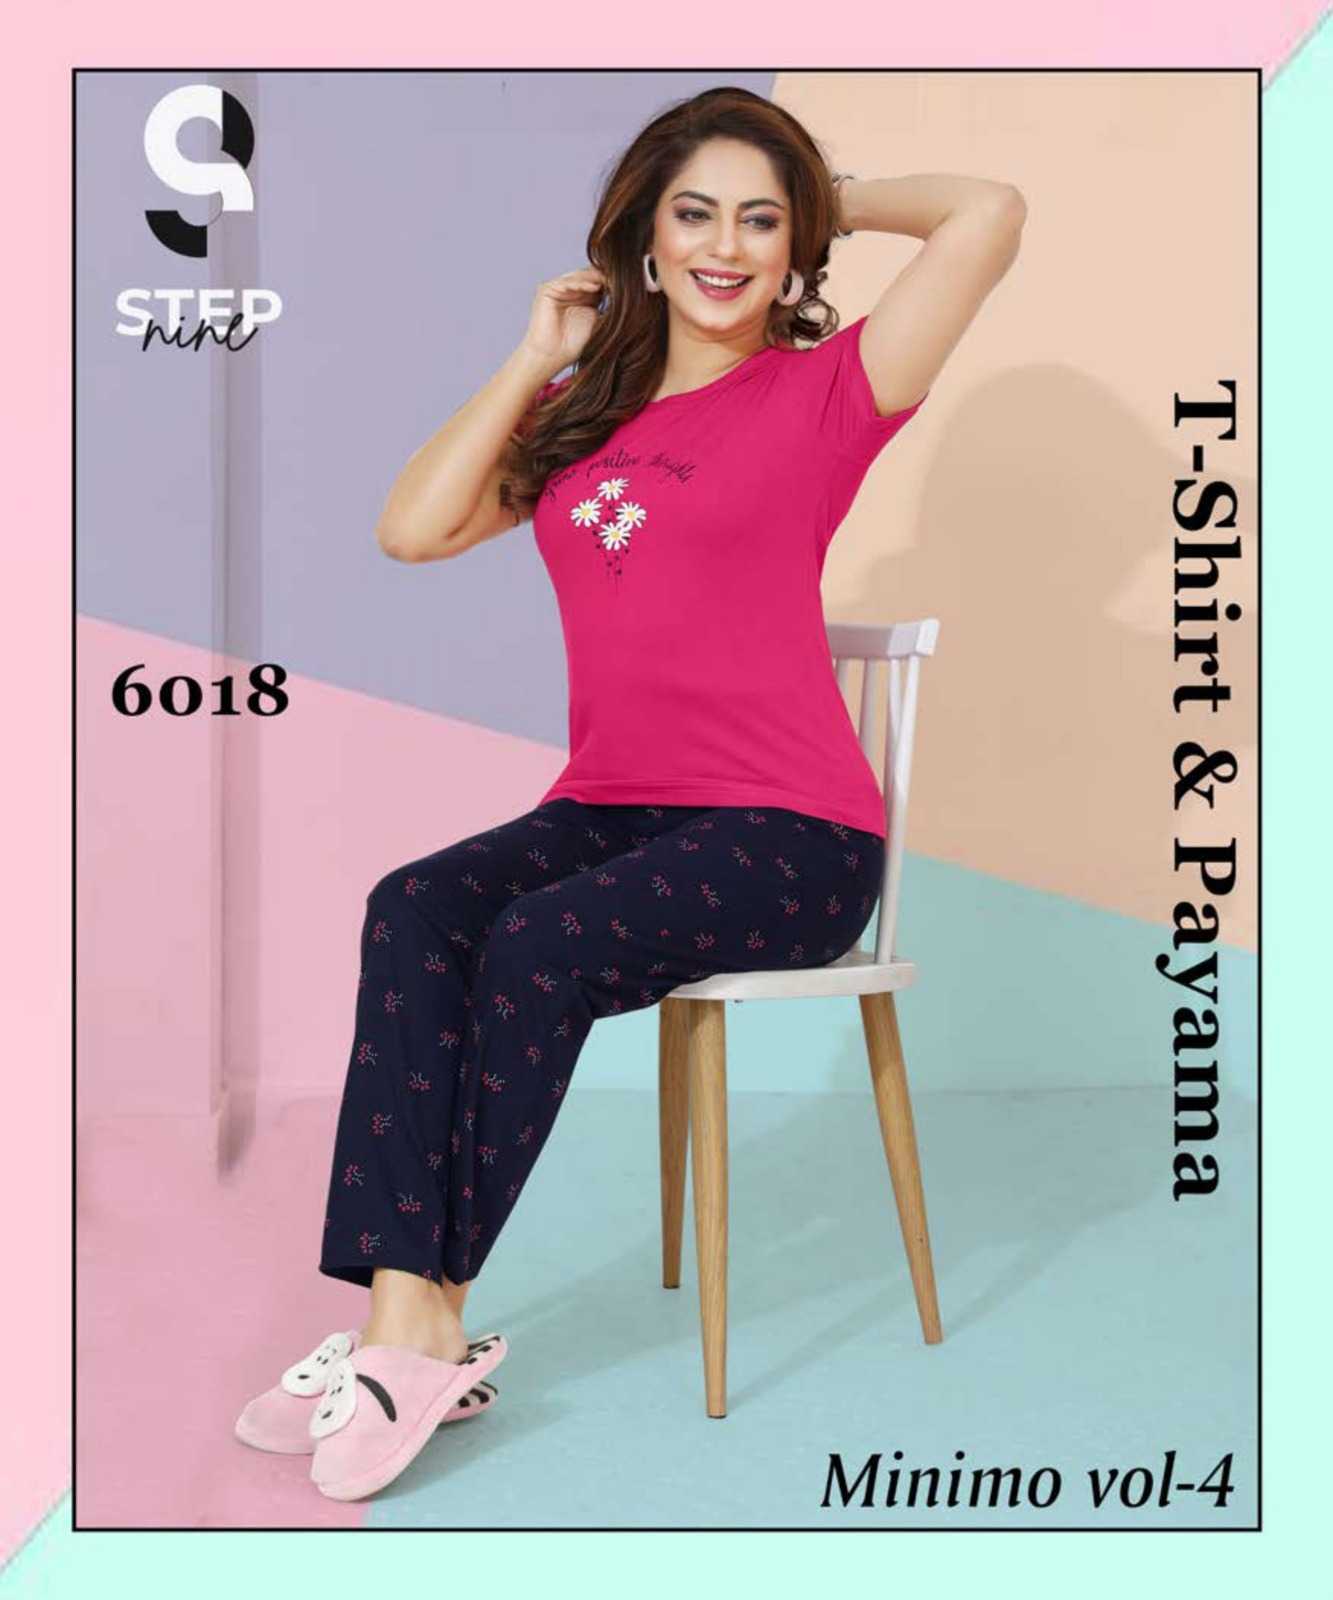 Step9 minimo vol 4 launch daily use cotton t shirt with payjama night wear